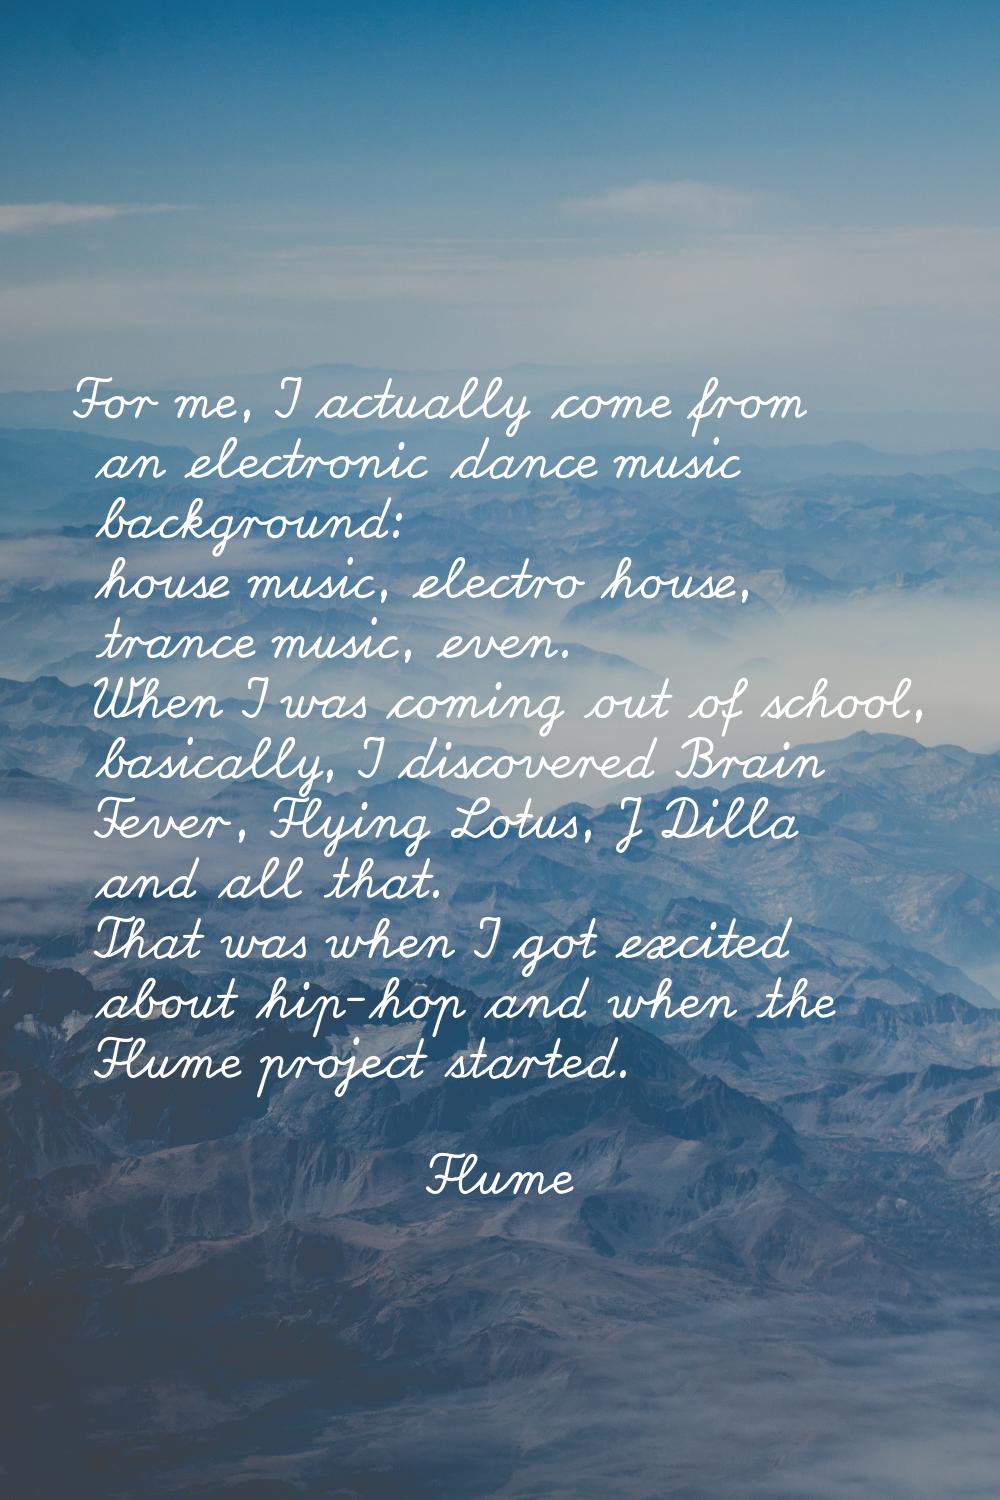 For me, I actually come from an electronic dance music background: house music, electro house, tran